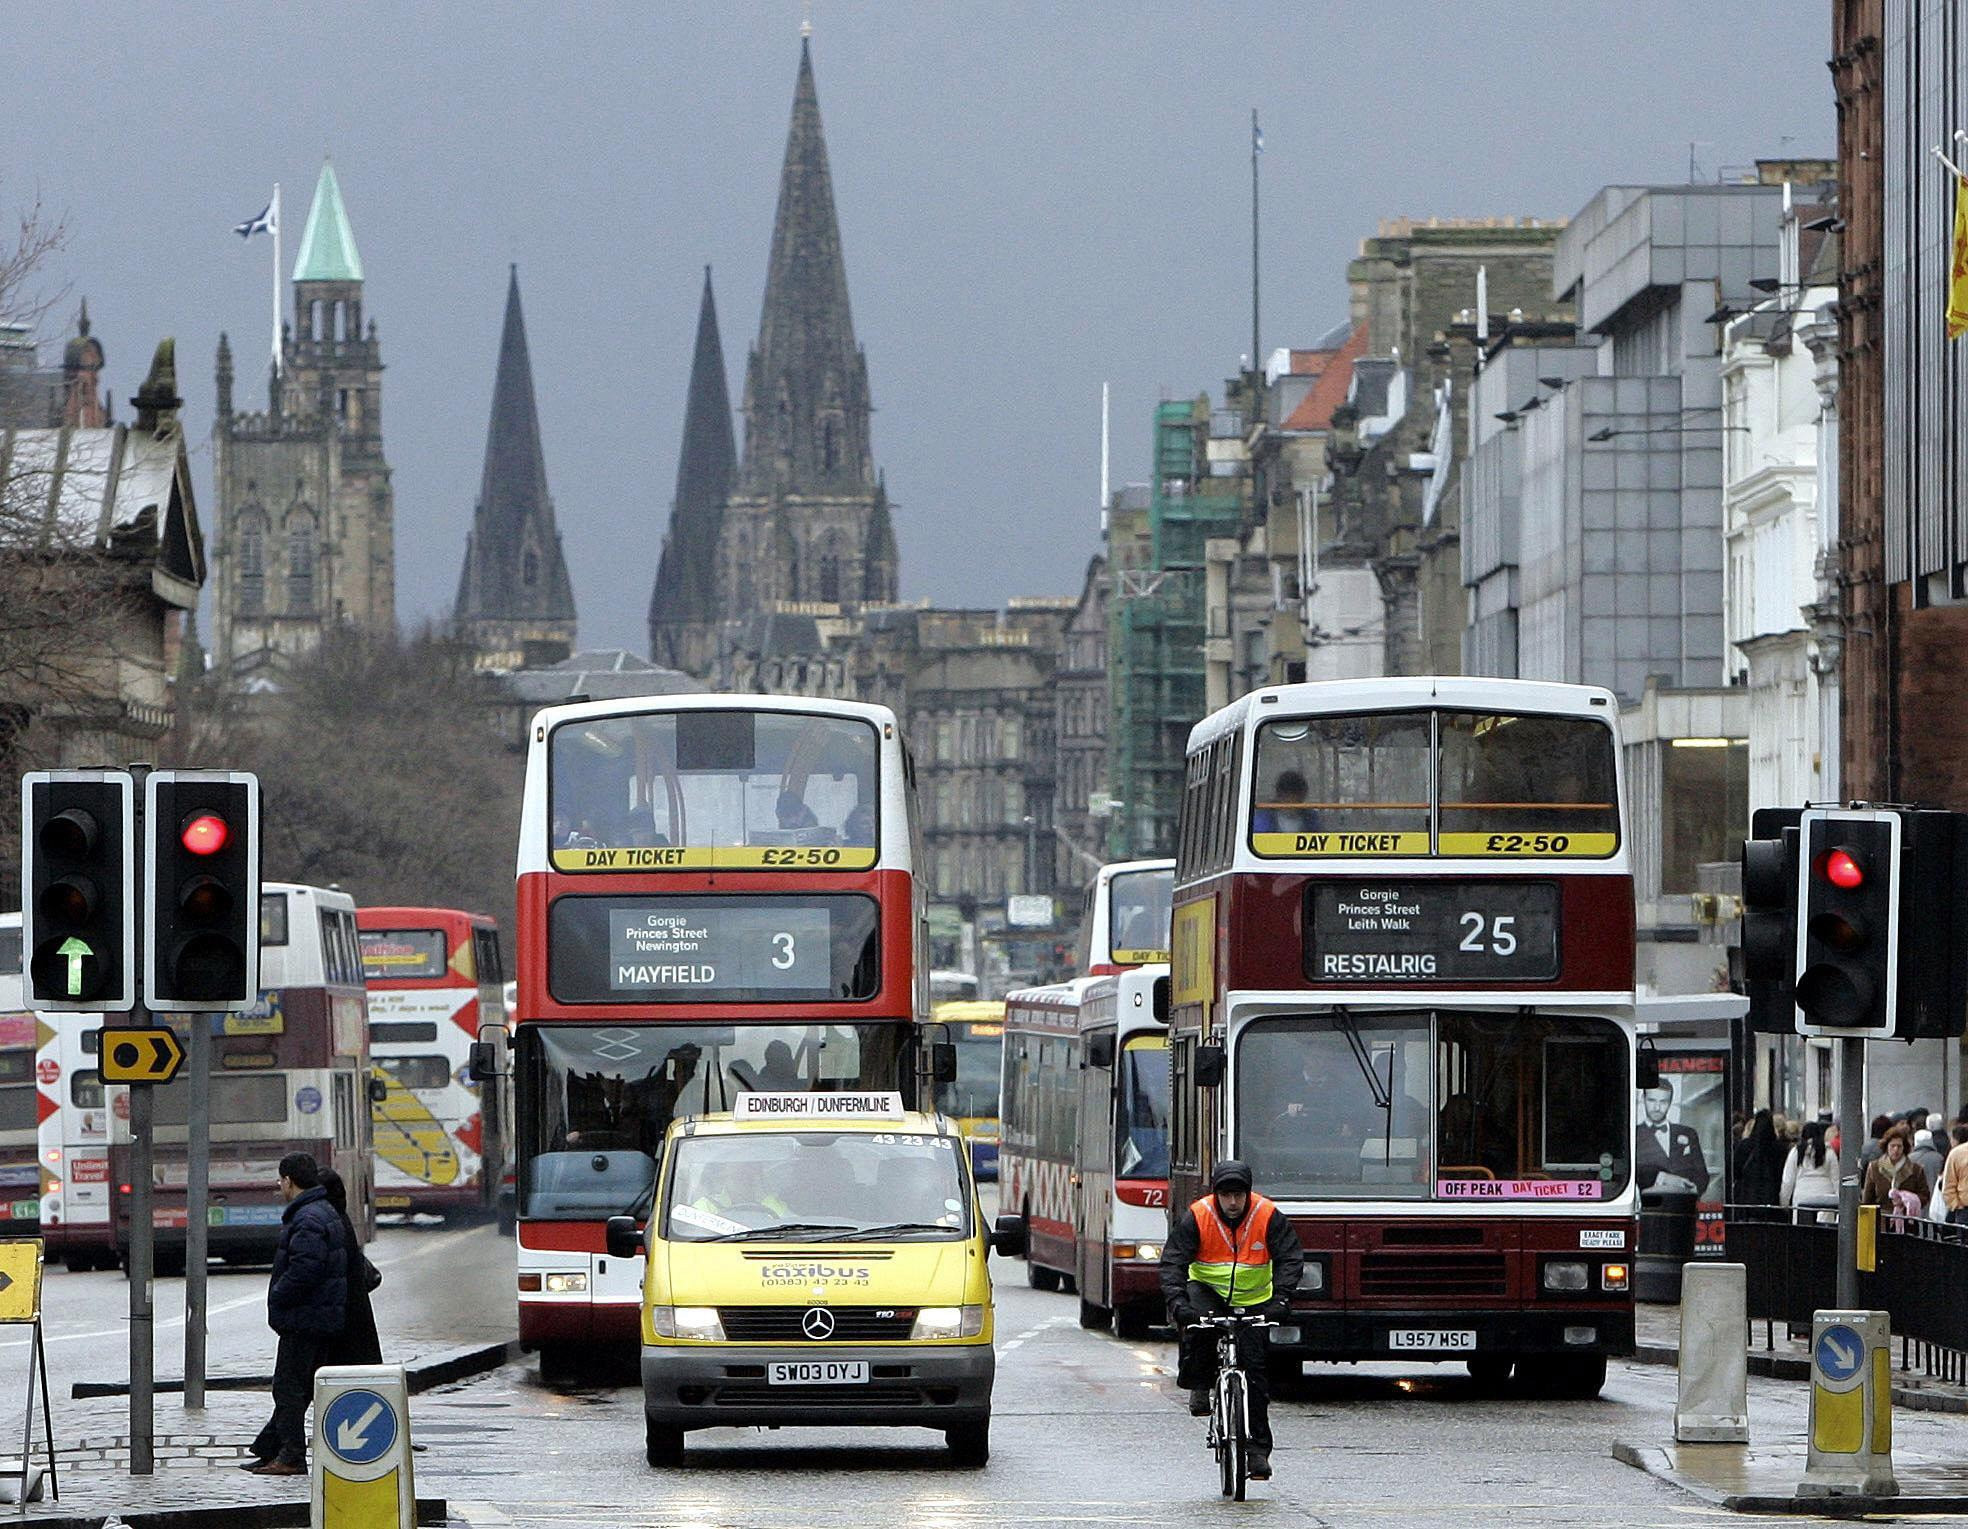 Transport minister Humza Yousaf has issued a call for views on proposals aimed at making the concessionary travel scheme affordable in future. (Andrew Milligan/PA)